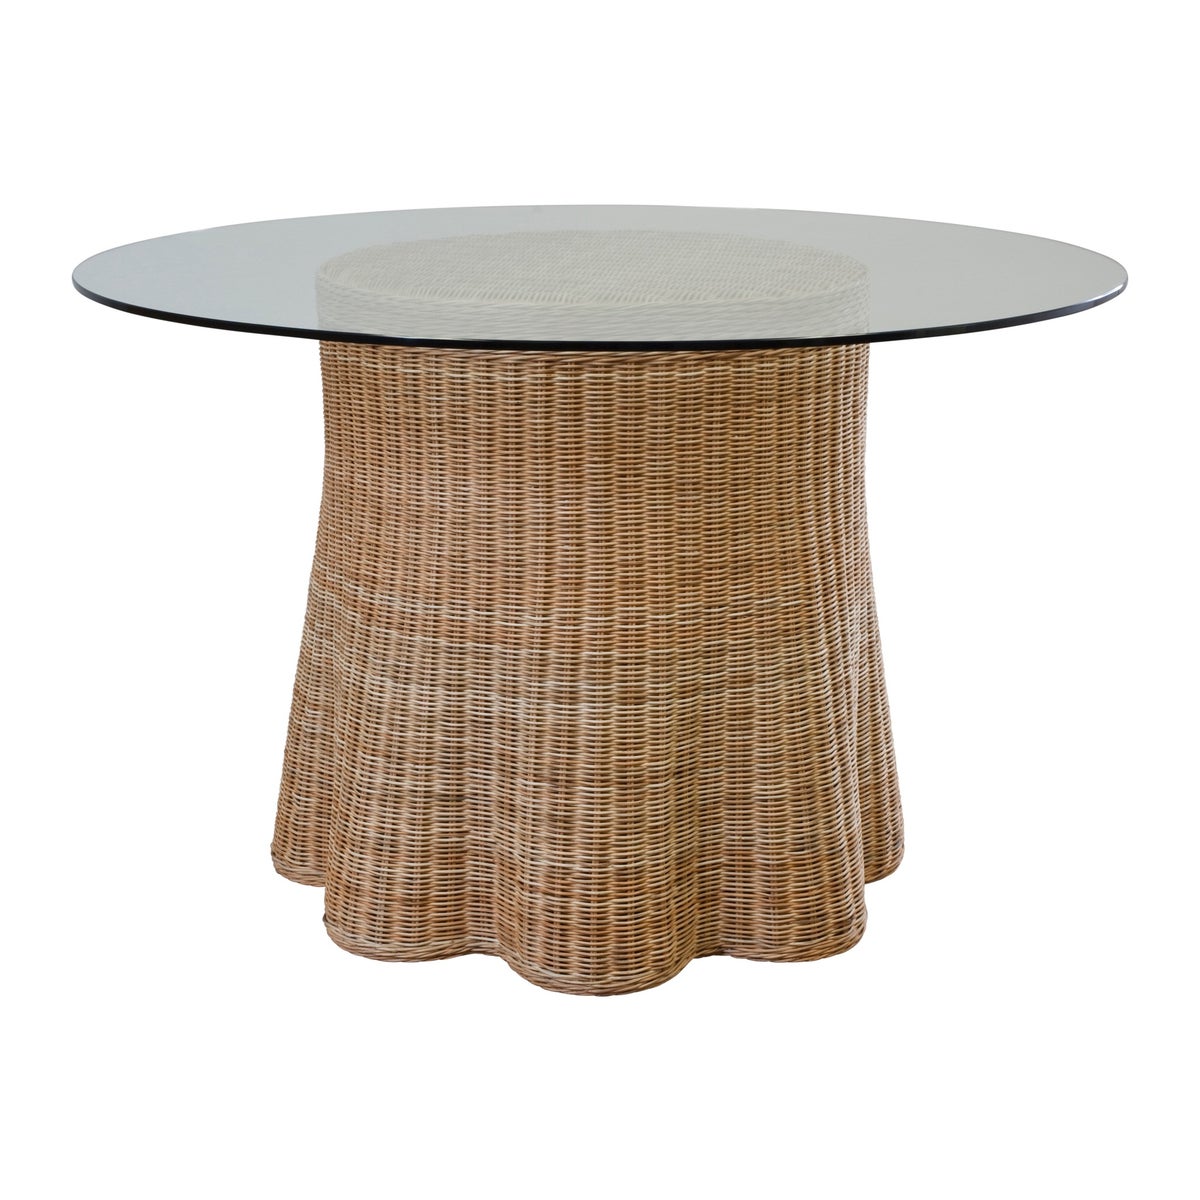 Scallop Dining Table Base